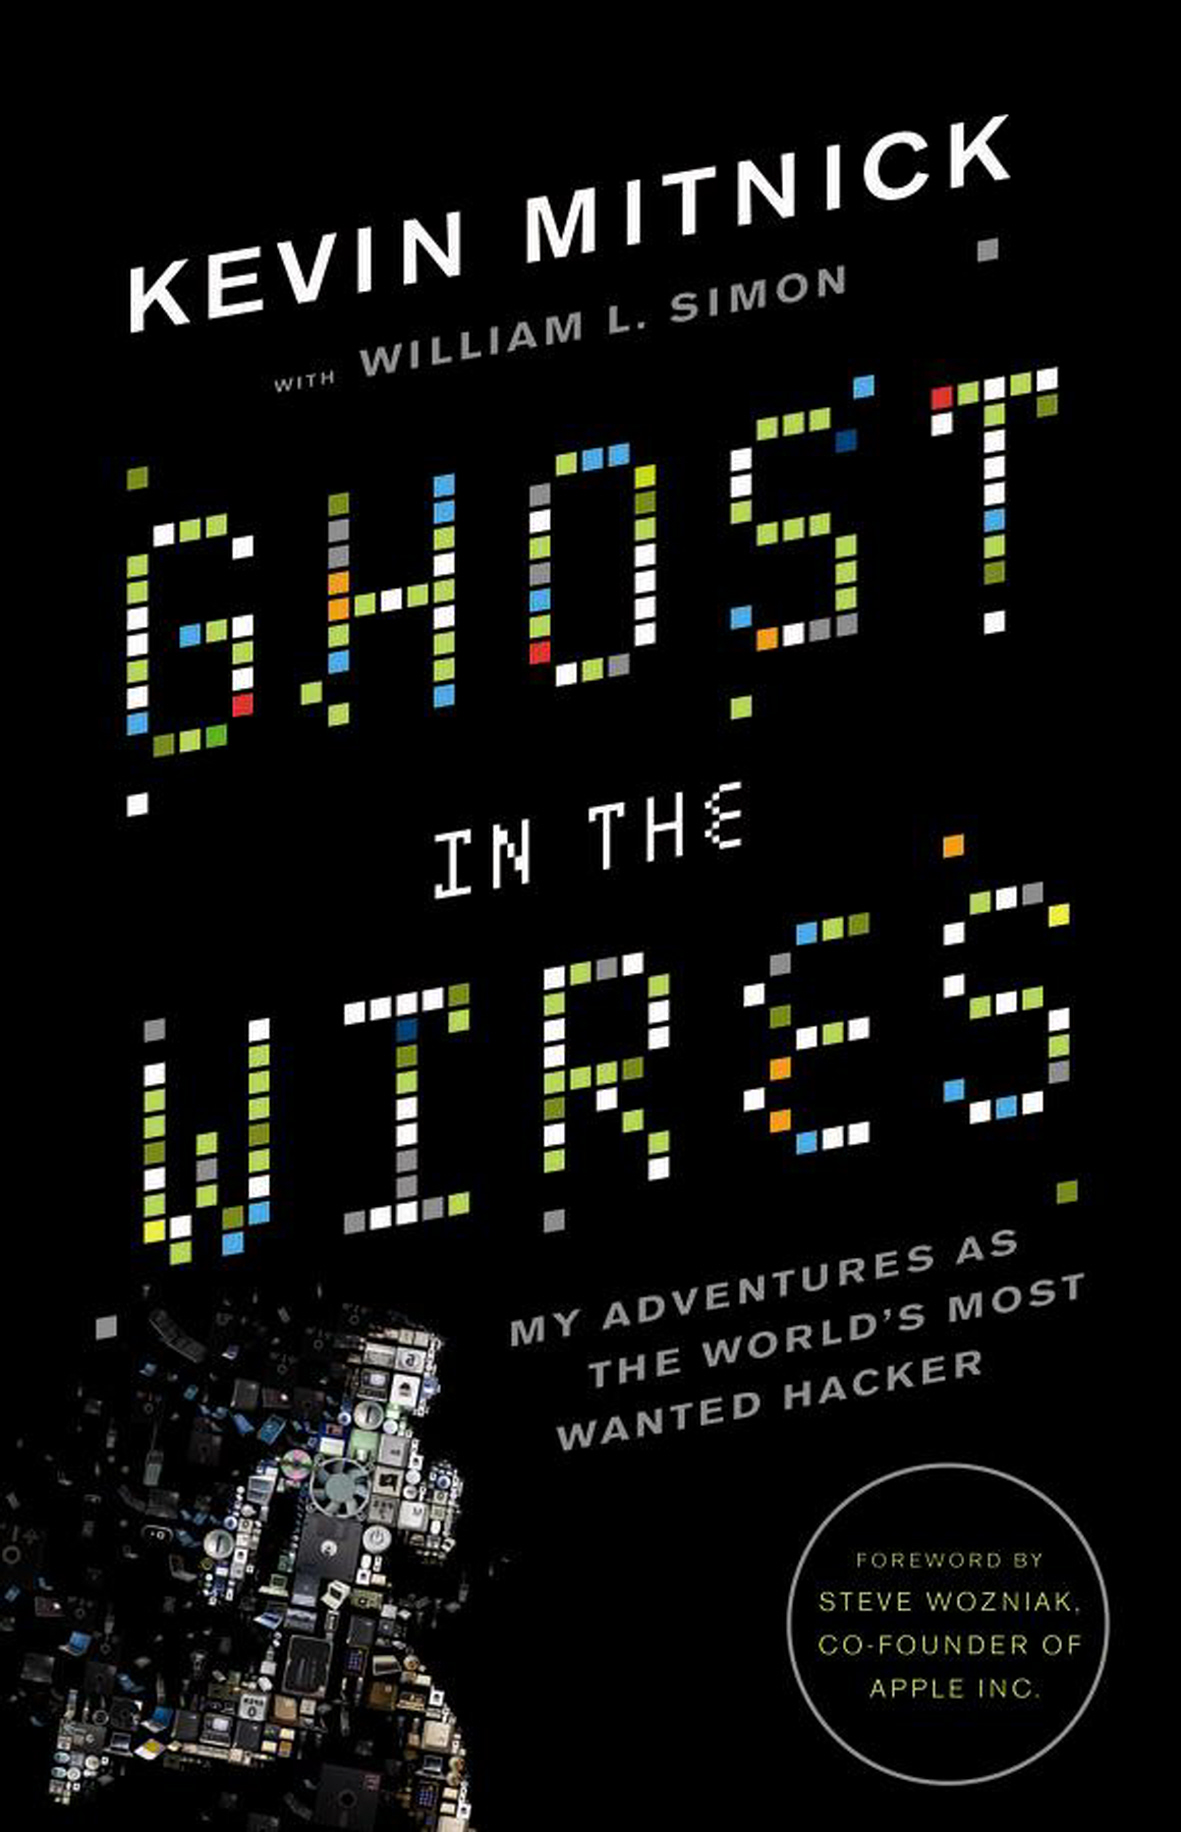 Book 1832 621 ghost in the wires: my adventures as the world's most wanted hacker